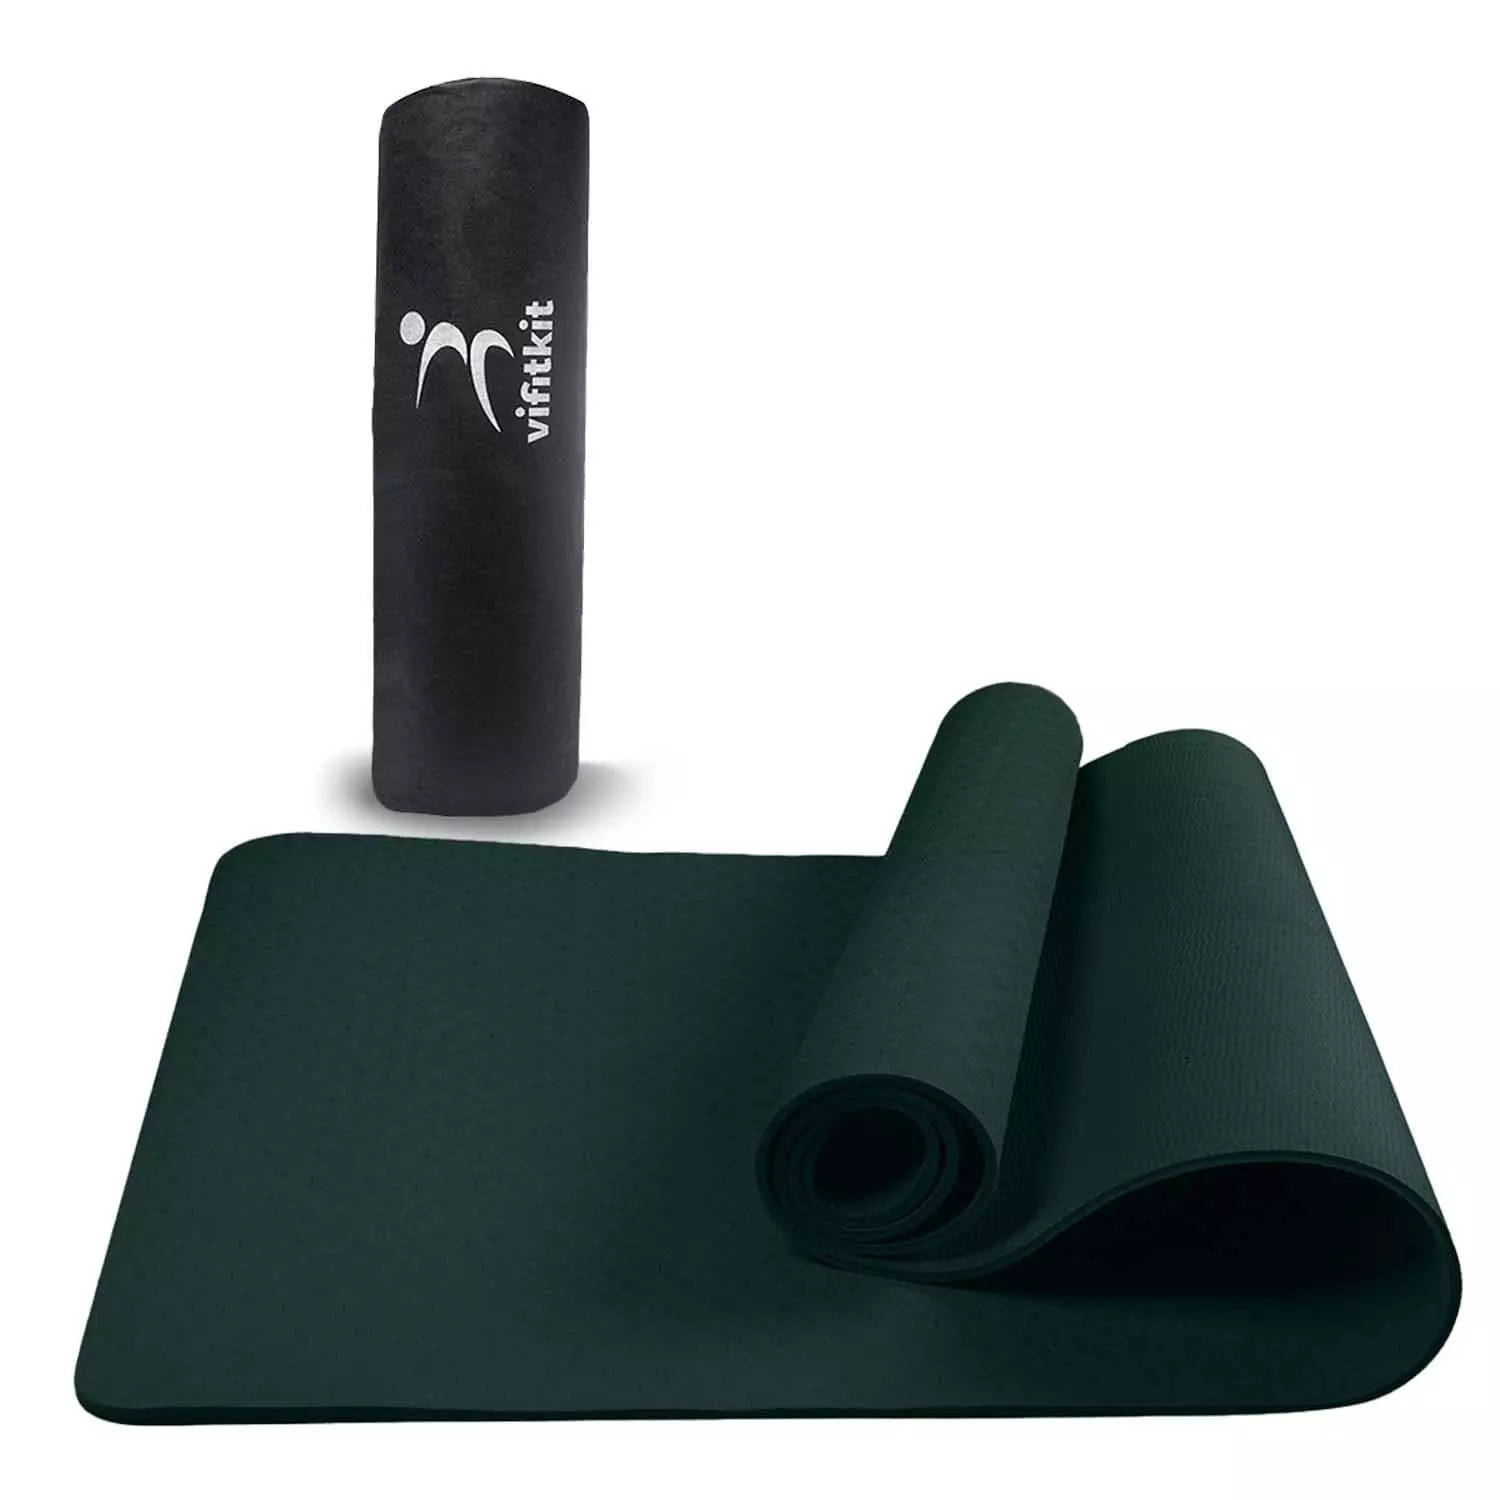 10 Best Yoga Mats in India for Comfortable Practice - Mishry (Mar